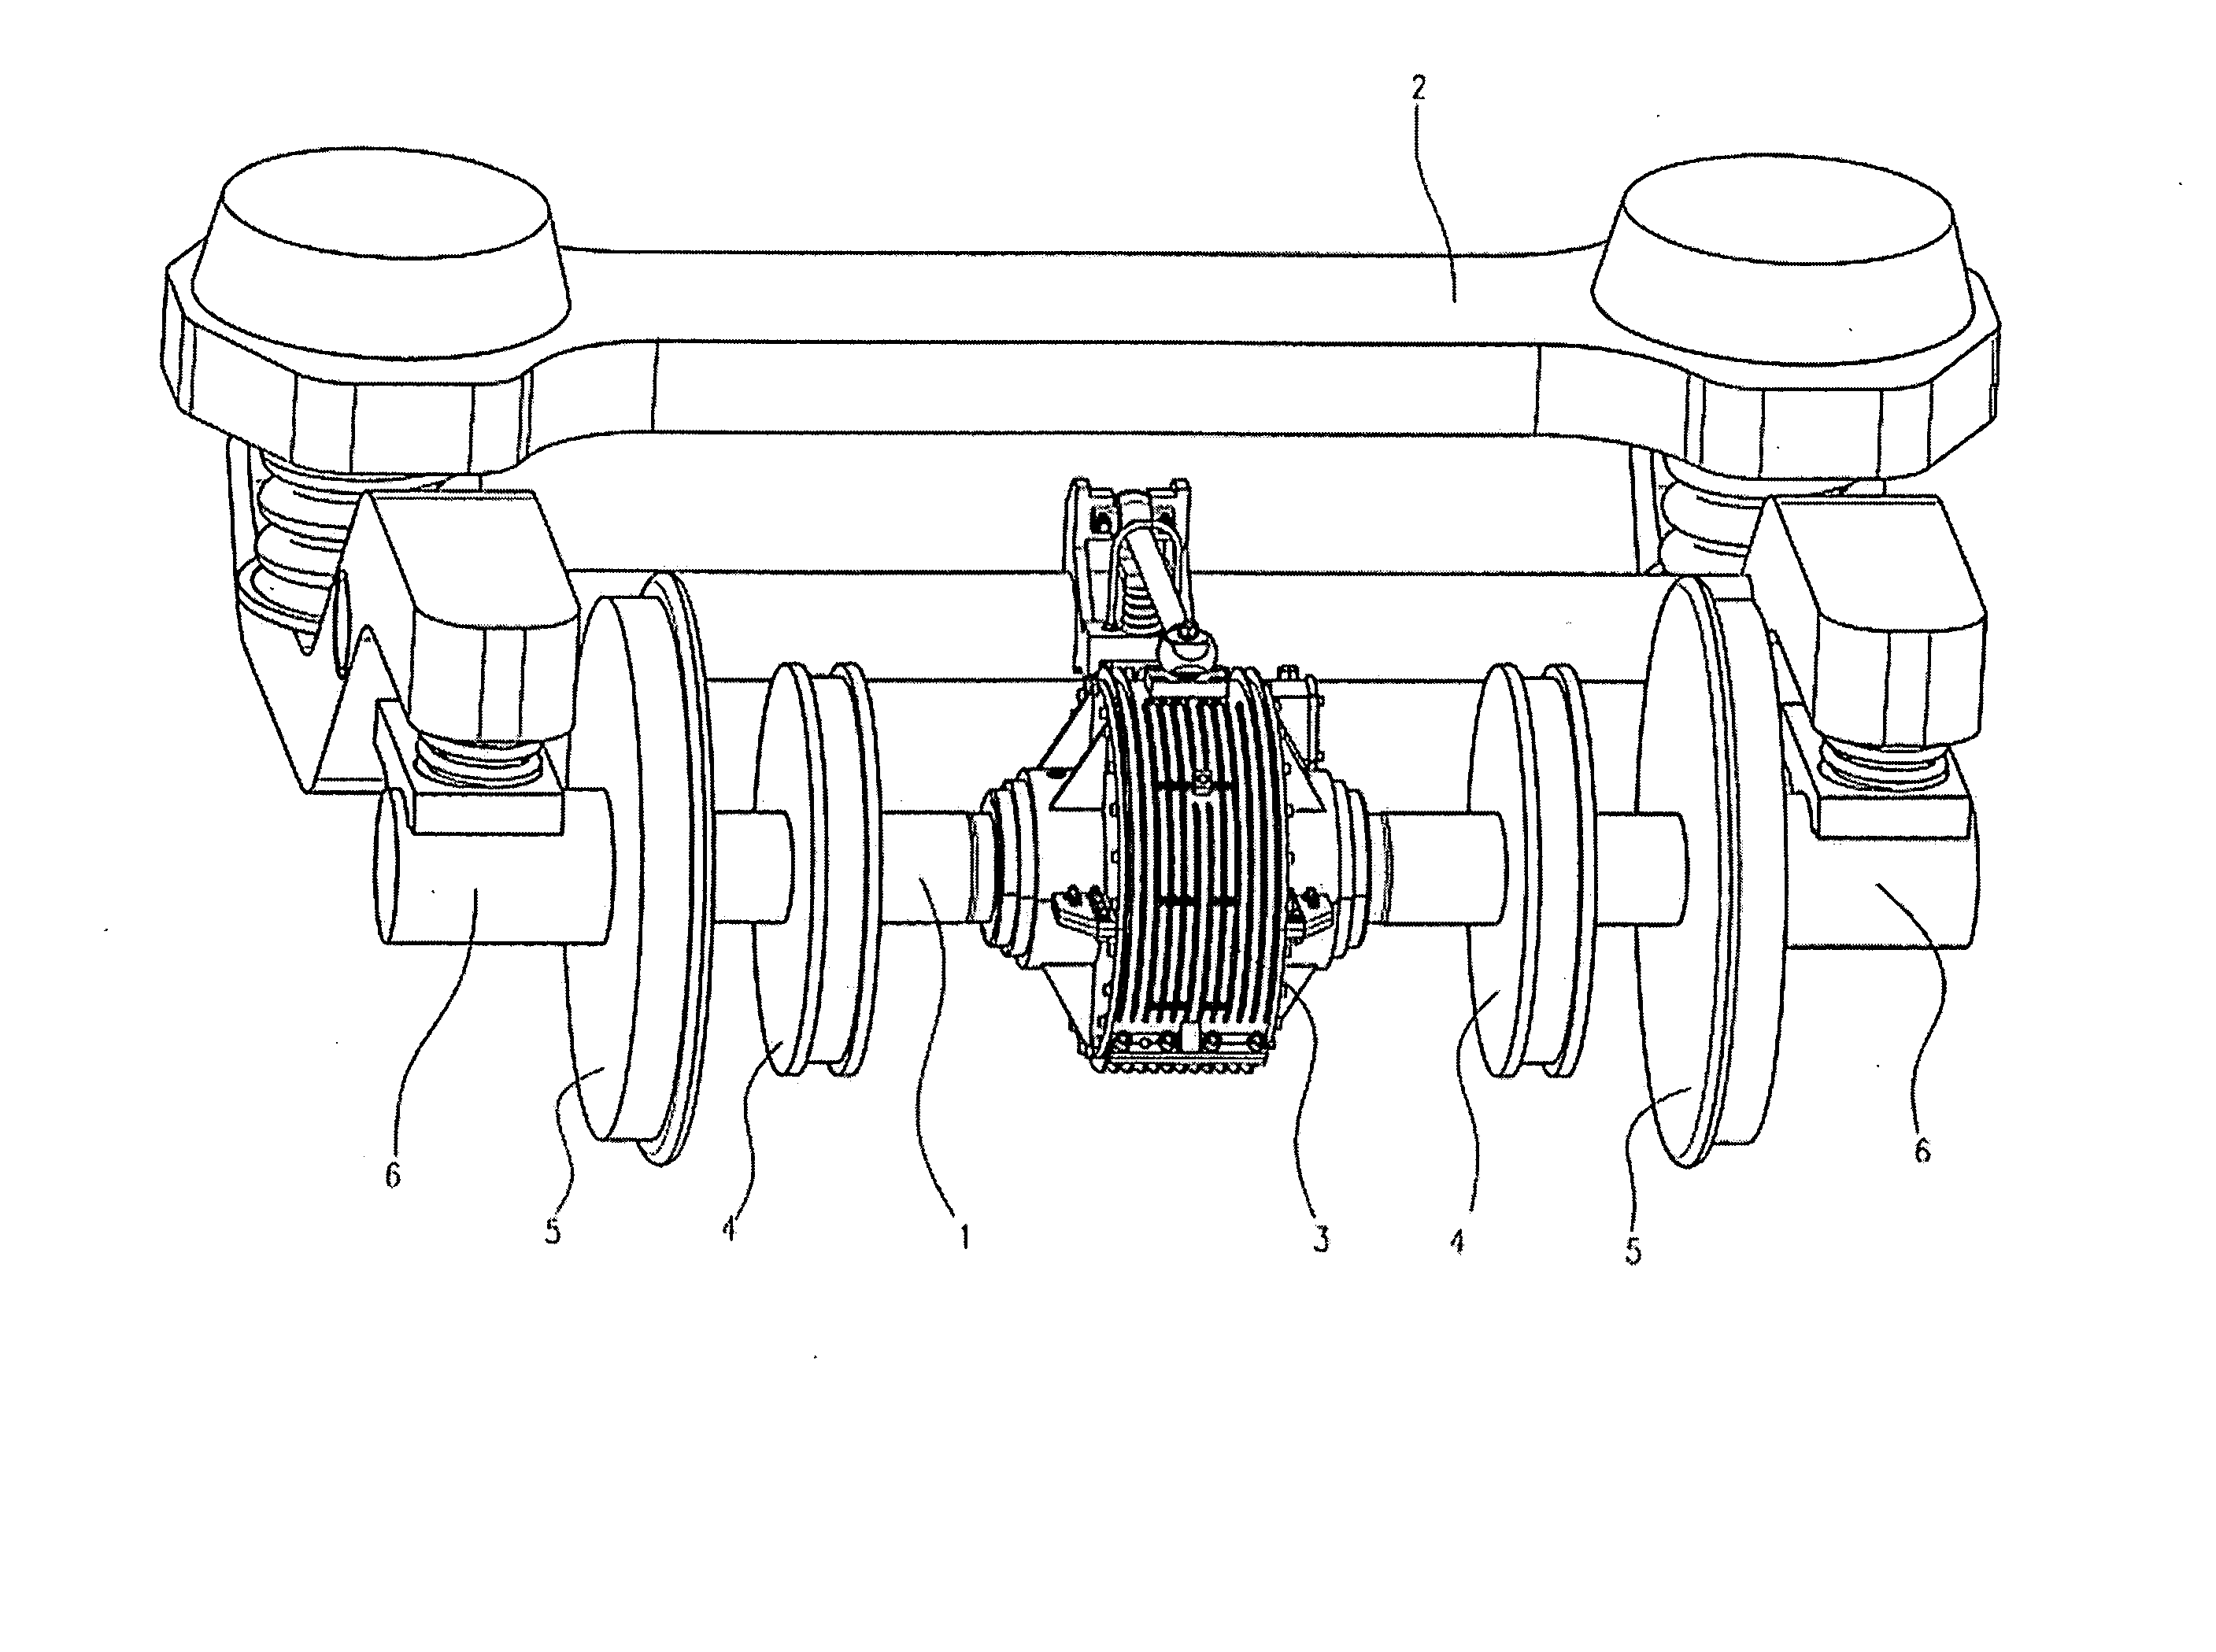 Axle-driven generator for railway carriages and the like